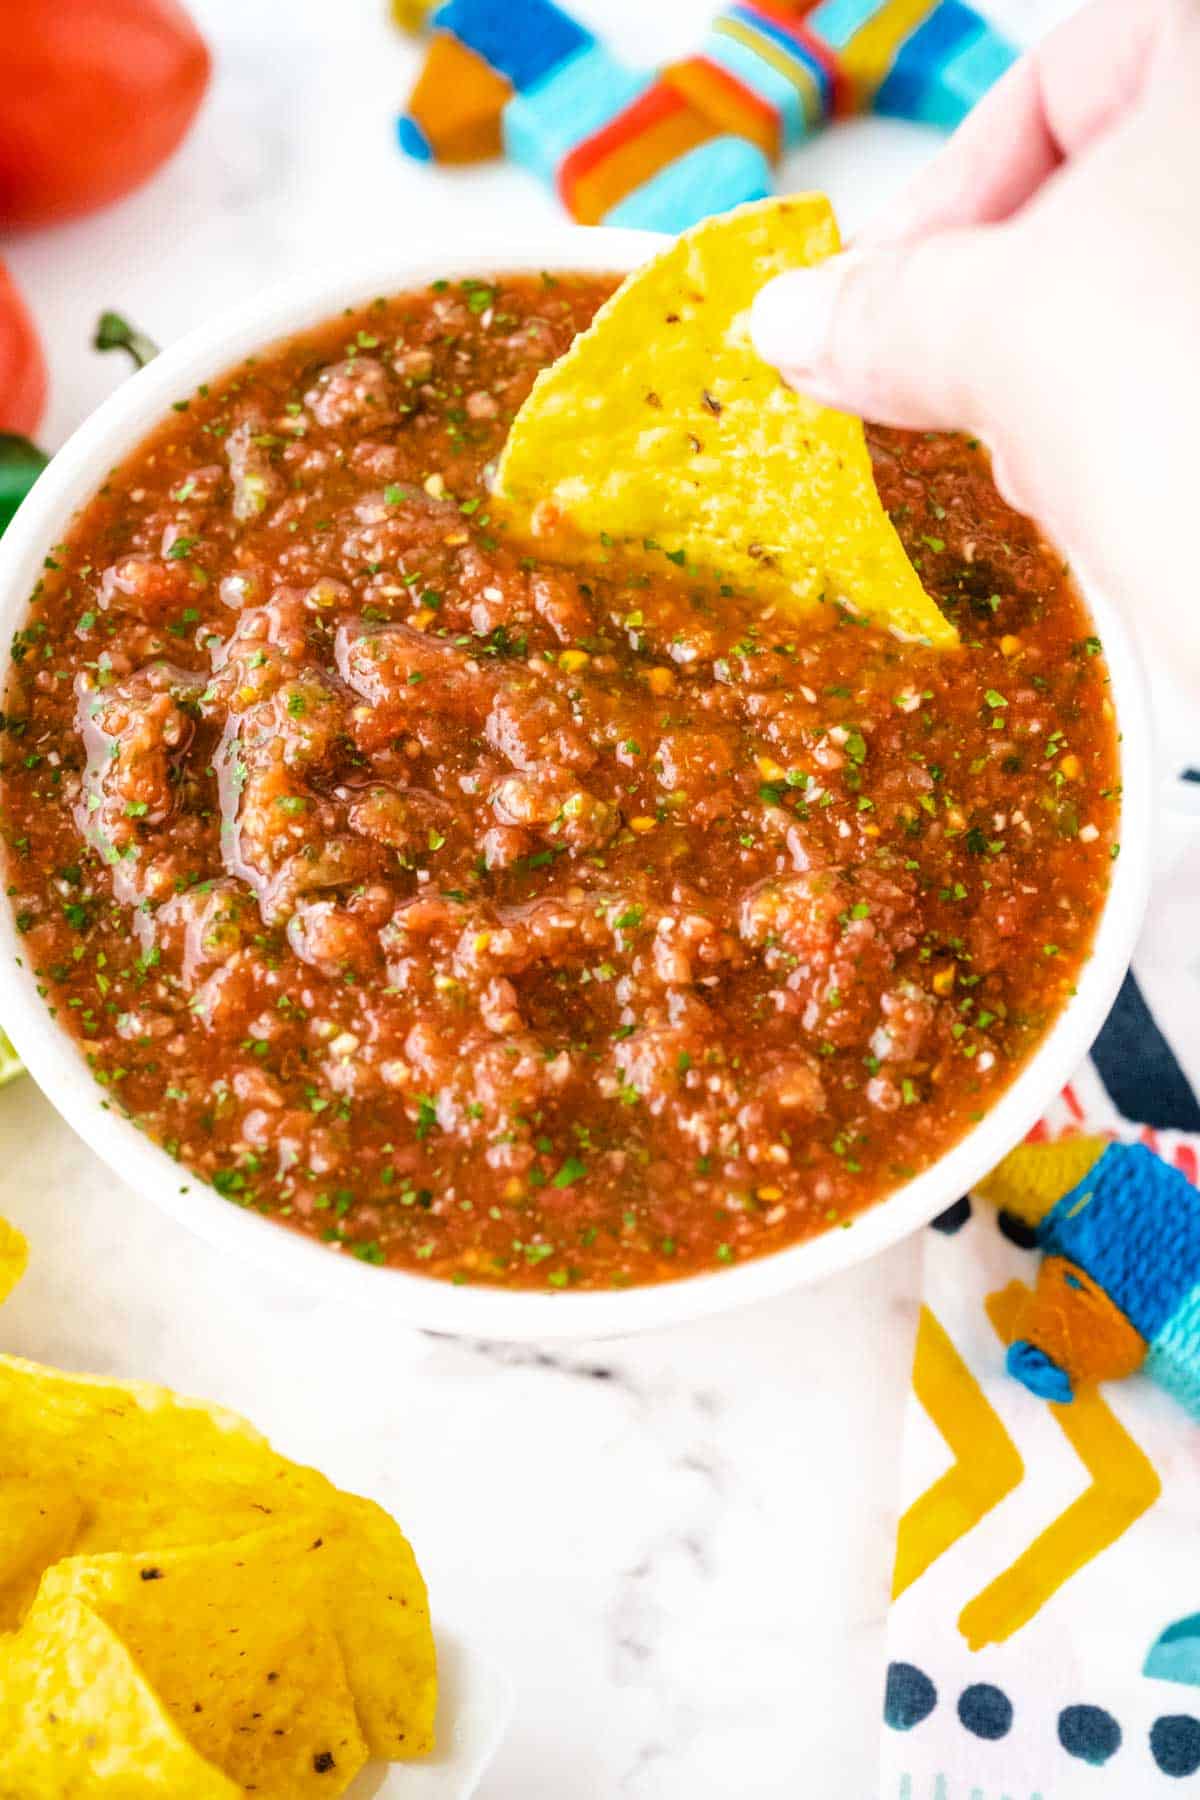 A white bowl of salsa with a hand dipping a tortilla chip into the salsa.